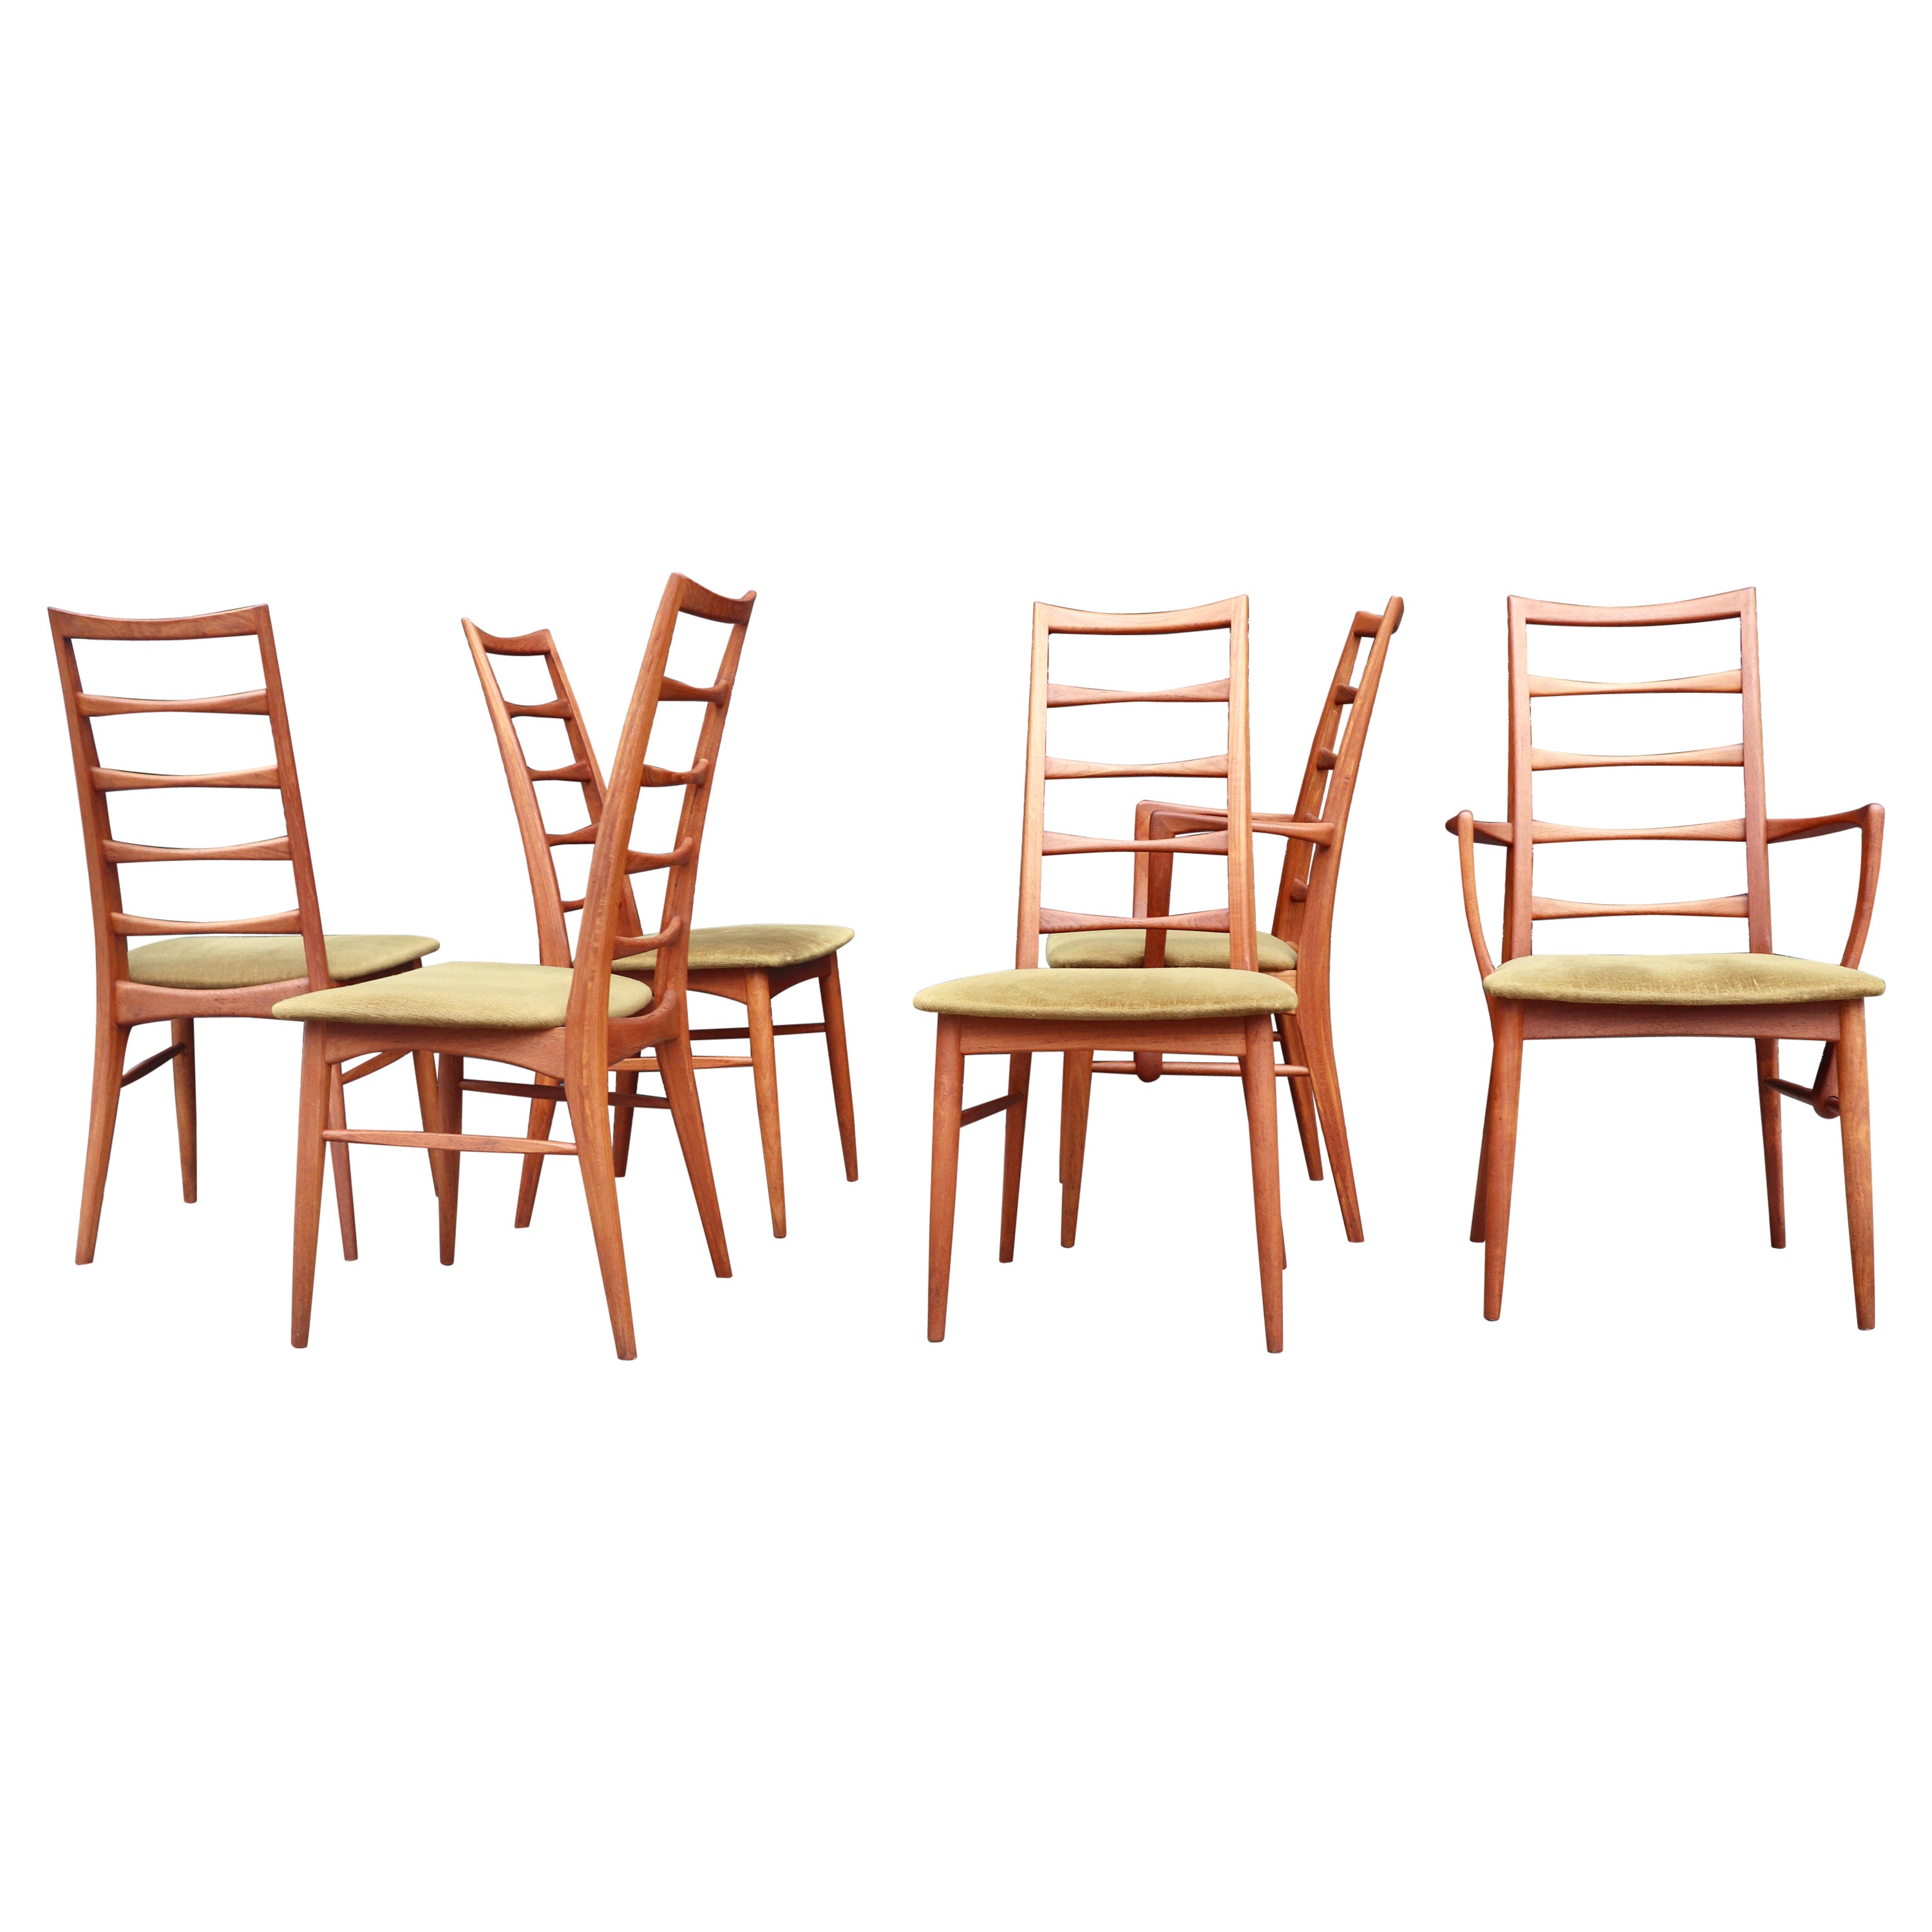 Six Danish 1960s 'Lis' Model teak dining chairs by Niels Koefoed for Hornslet  For Sale